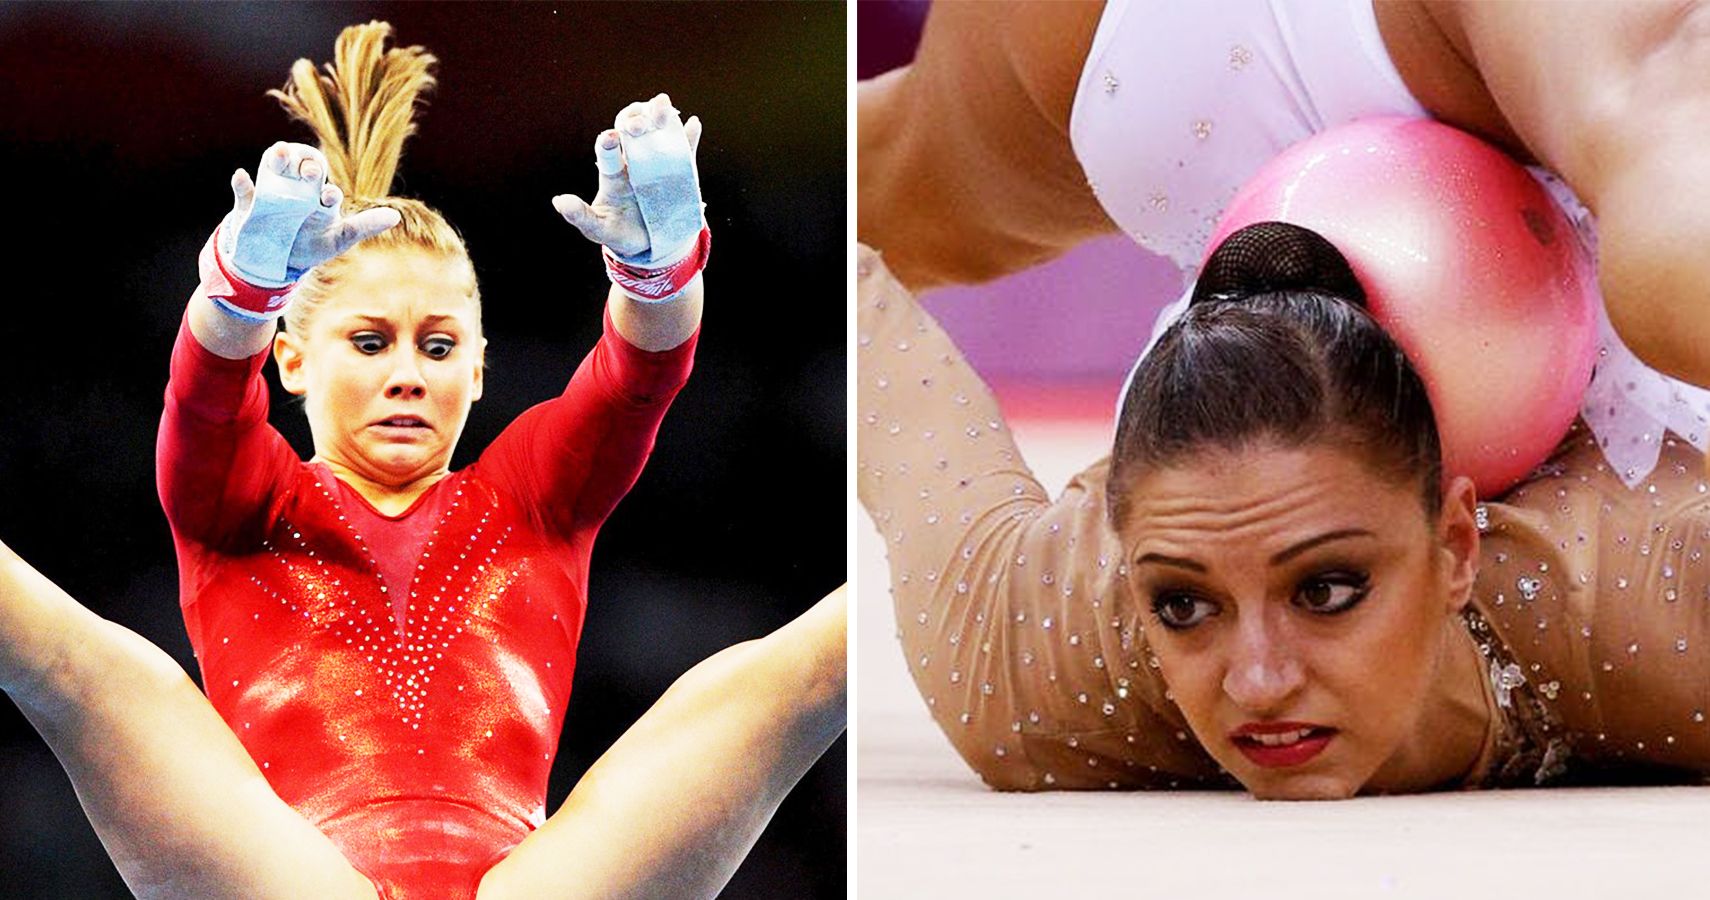 the-most-embarrassing-pictures-of-female-gymnasts-ever-taken